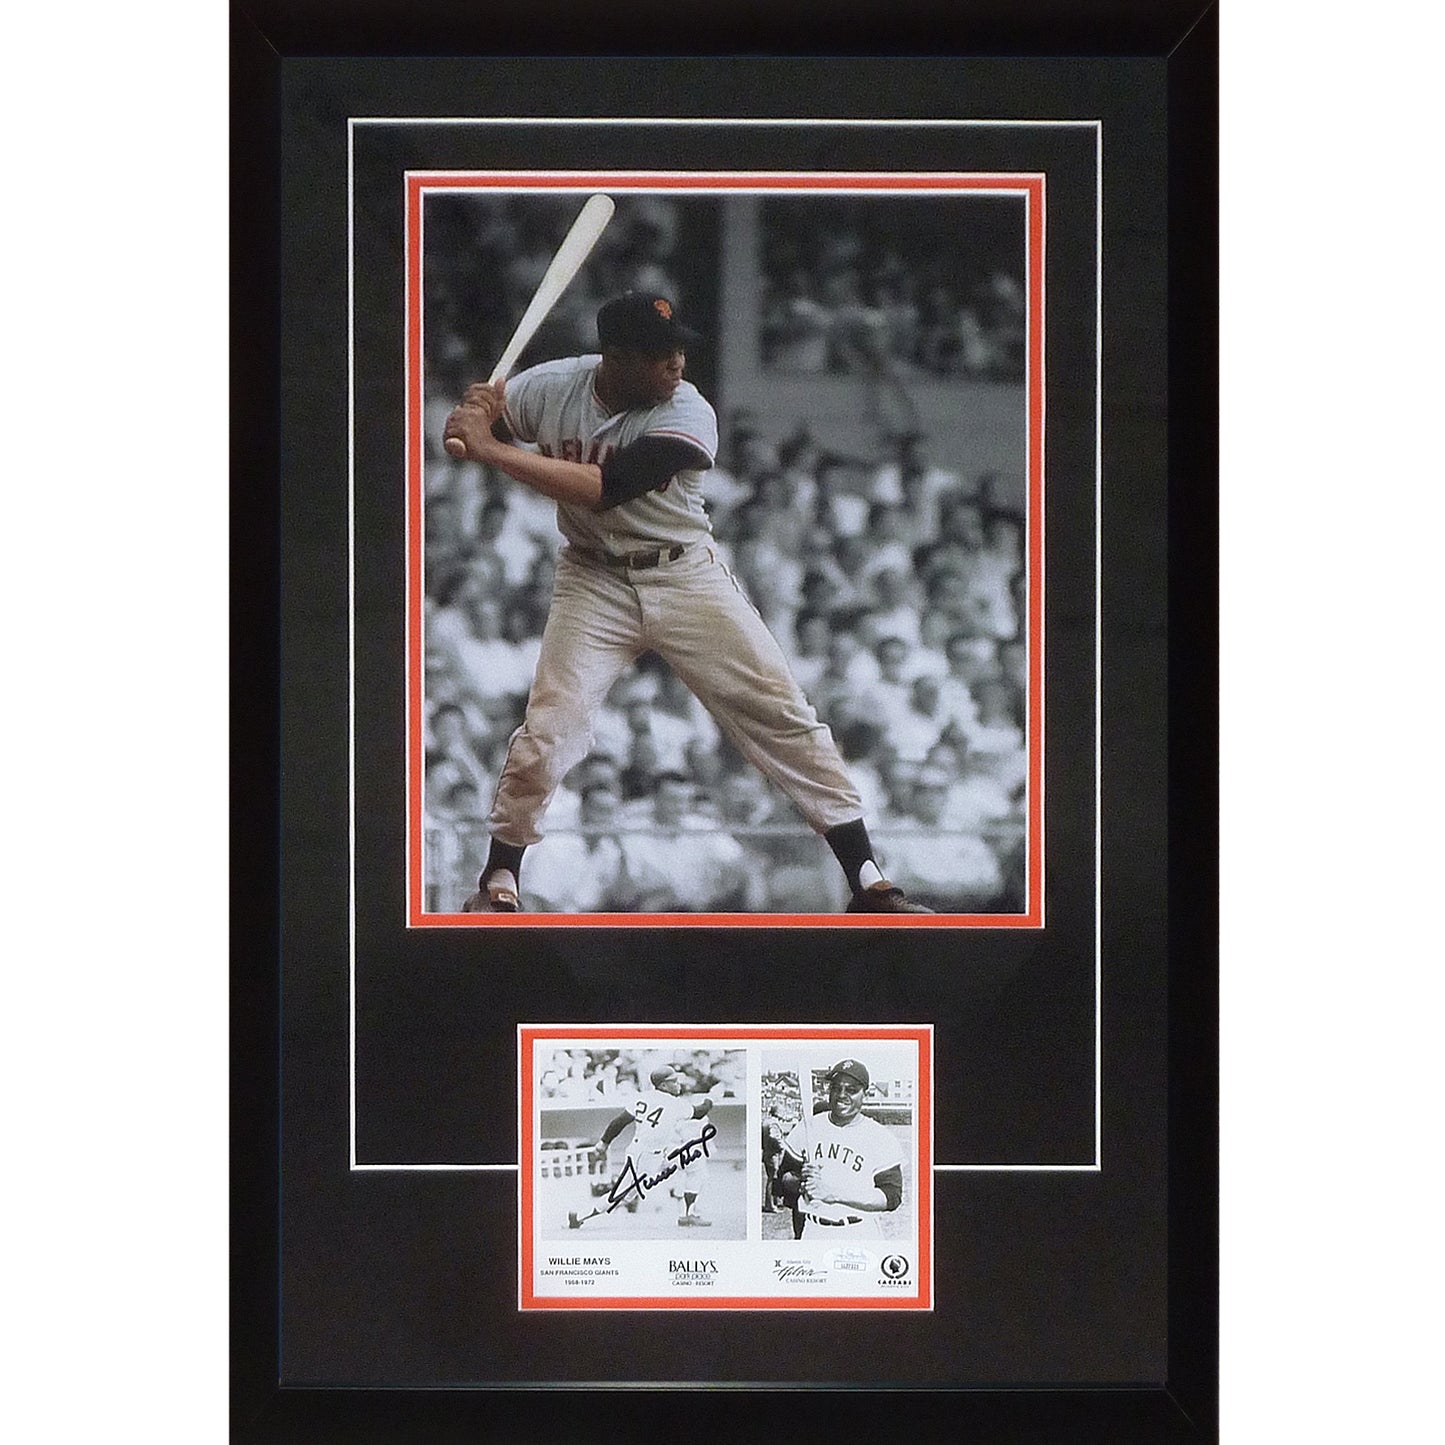 Willie Mays Autographed San Francisco Giants (Spotlight) 11x14 Deluxe Framed with Signature Below - JSA